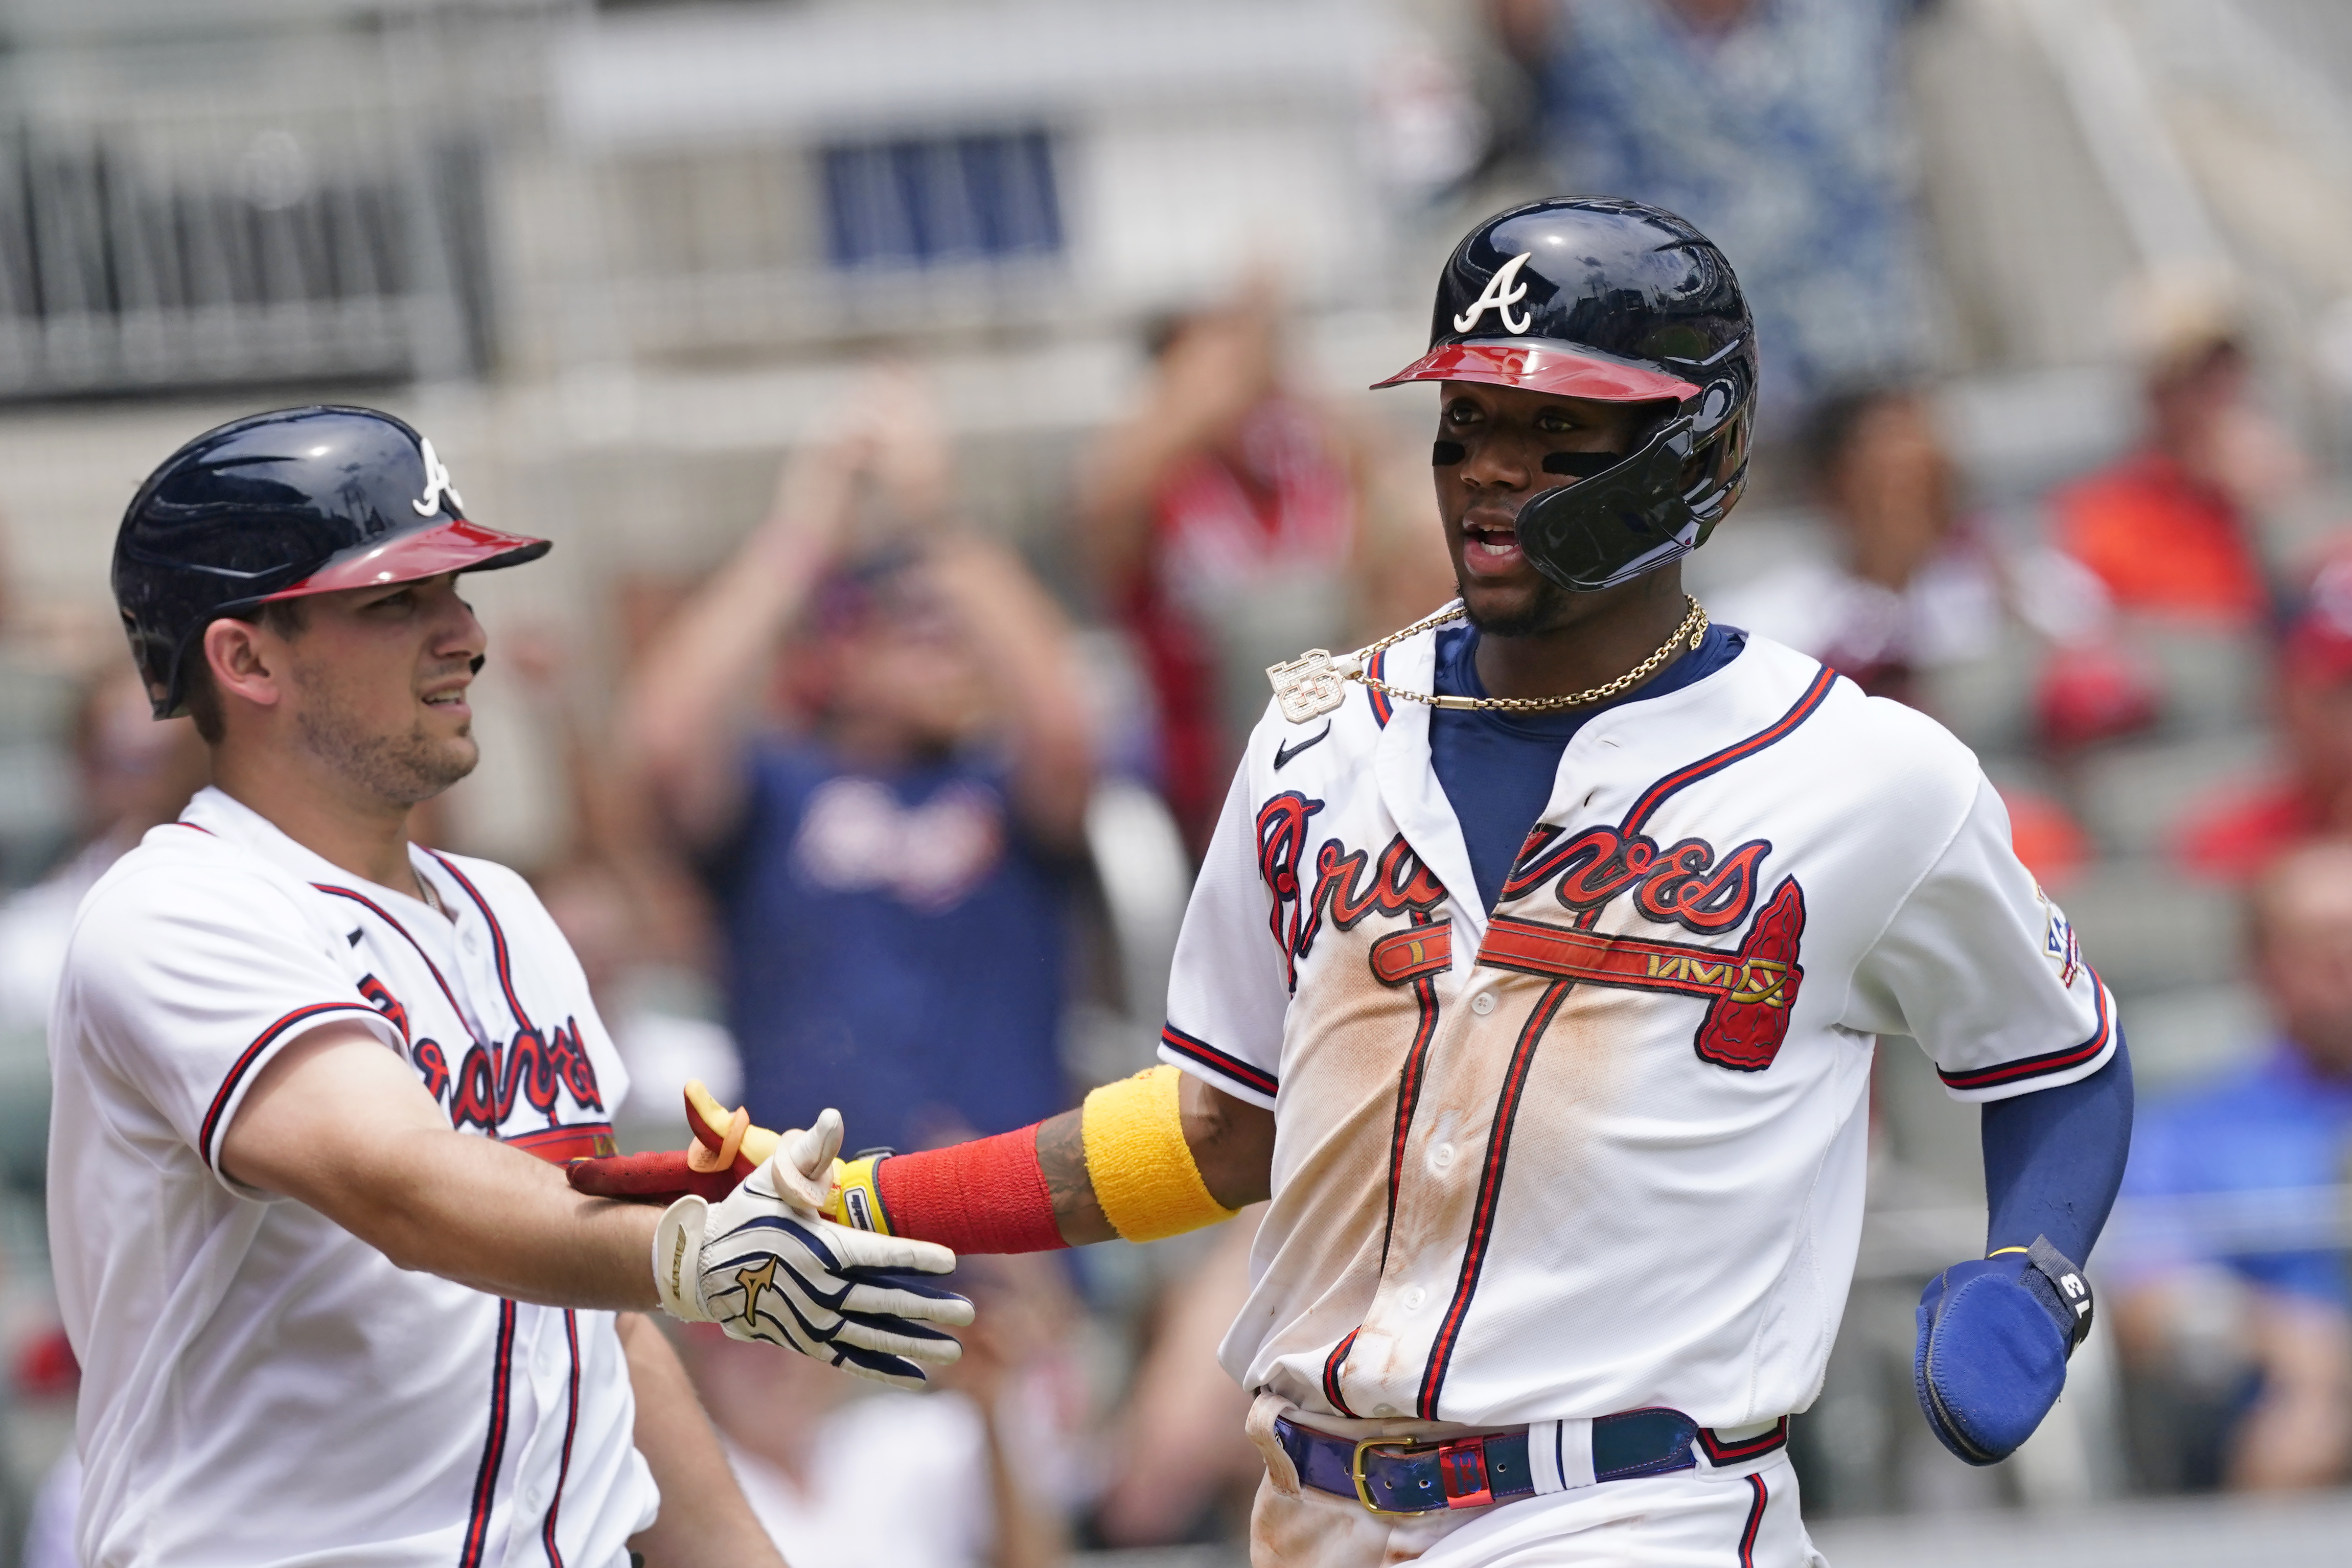 Swanson stays hot with 2-run HR as Braves top Nationals 5-0